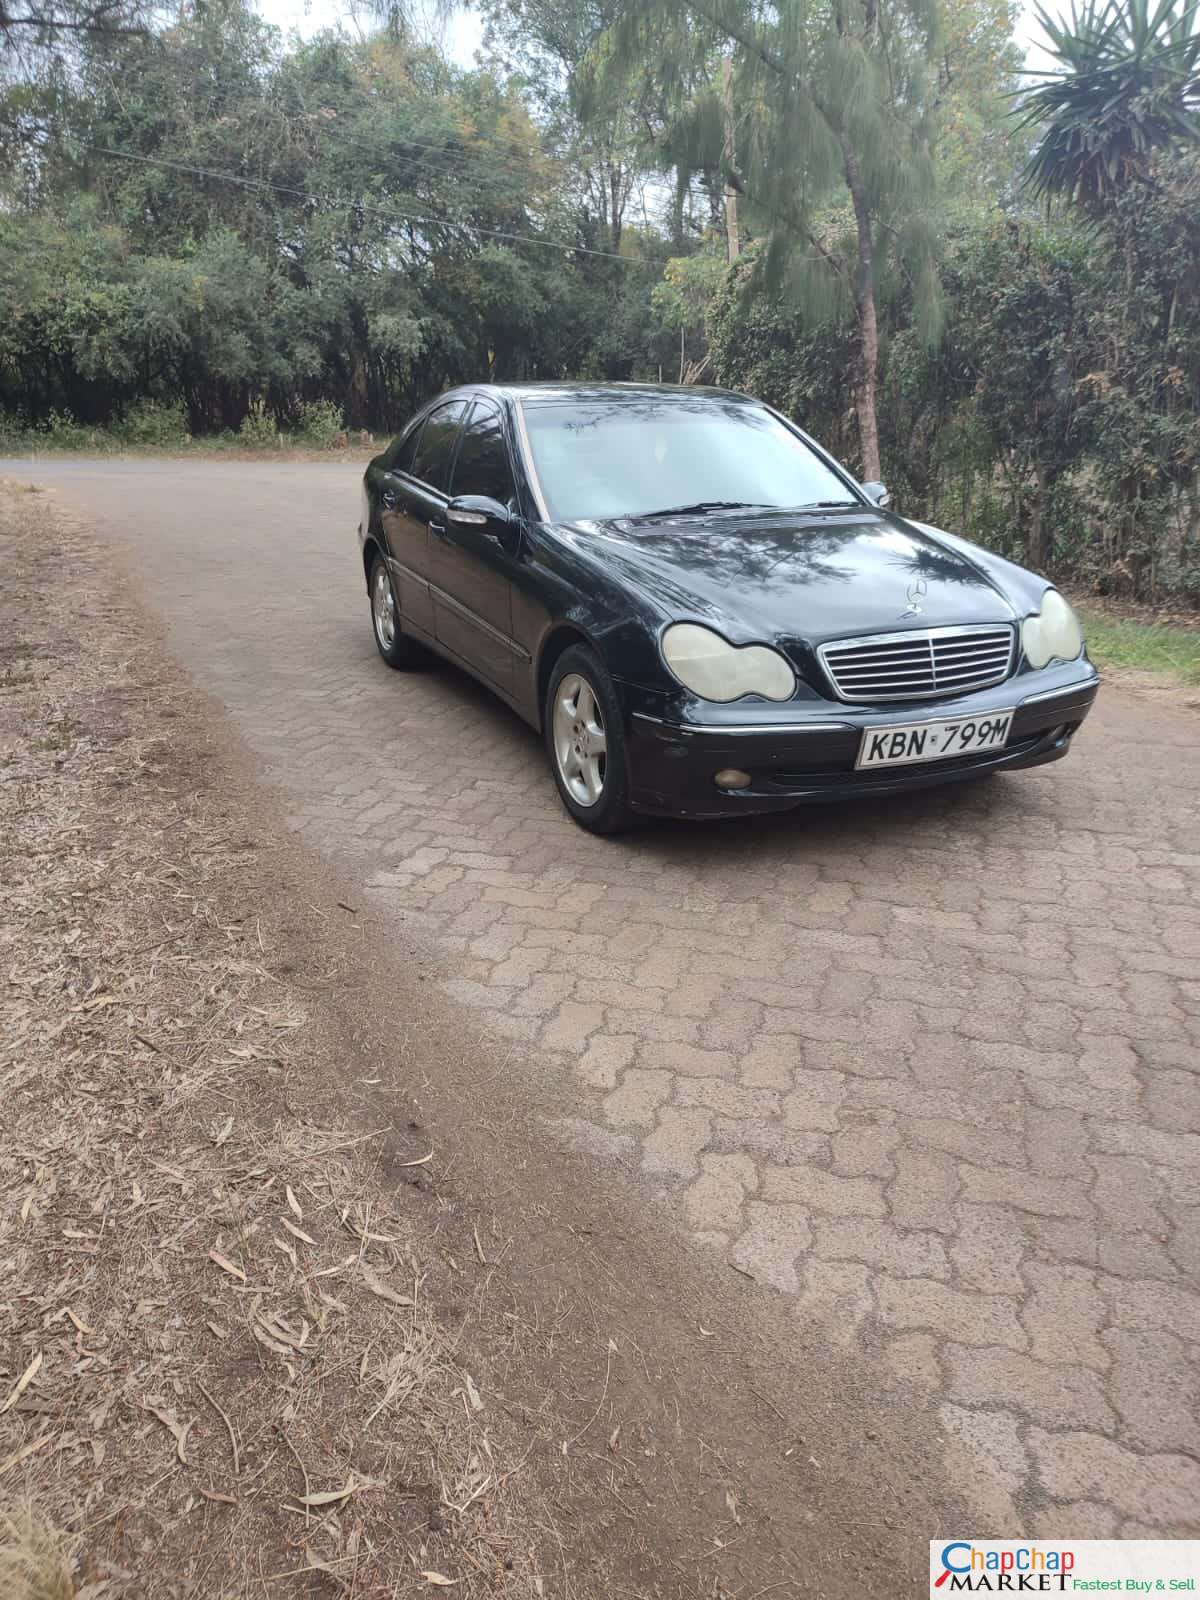 Mercedes Benz C200 for sale in Kenya QUICK SALE ðŸ”¥ You Pay 30% DEPOSIT Trade in OK EXCLUSIVE HIRE PURCHASE INSTALLMENTS